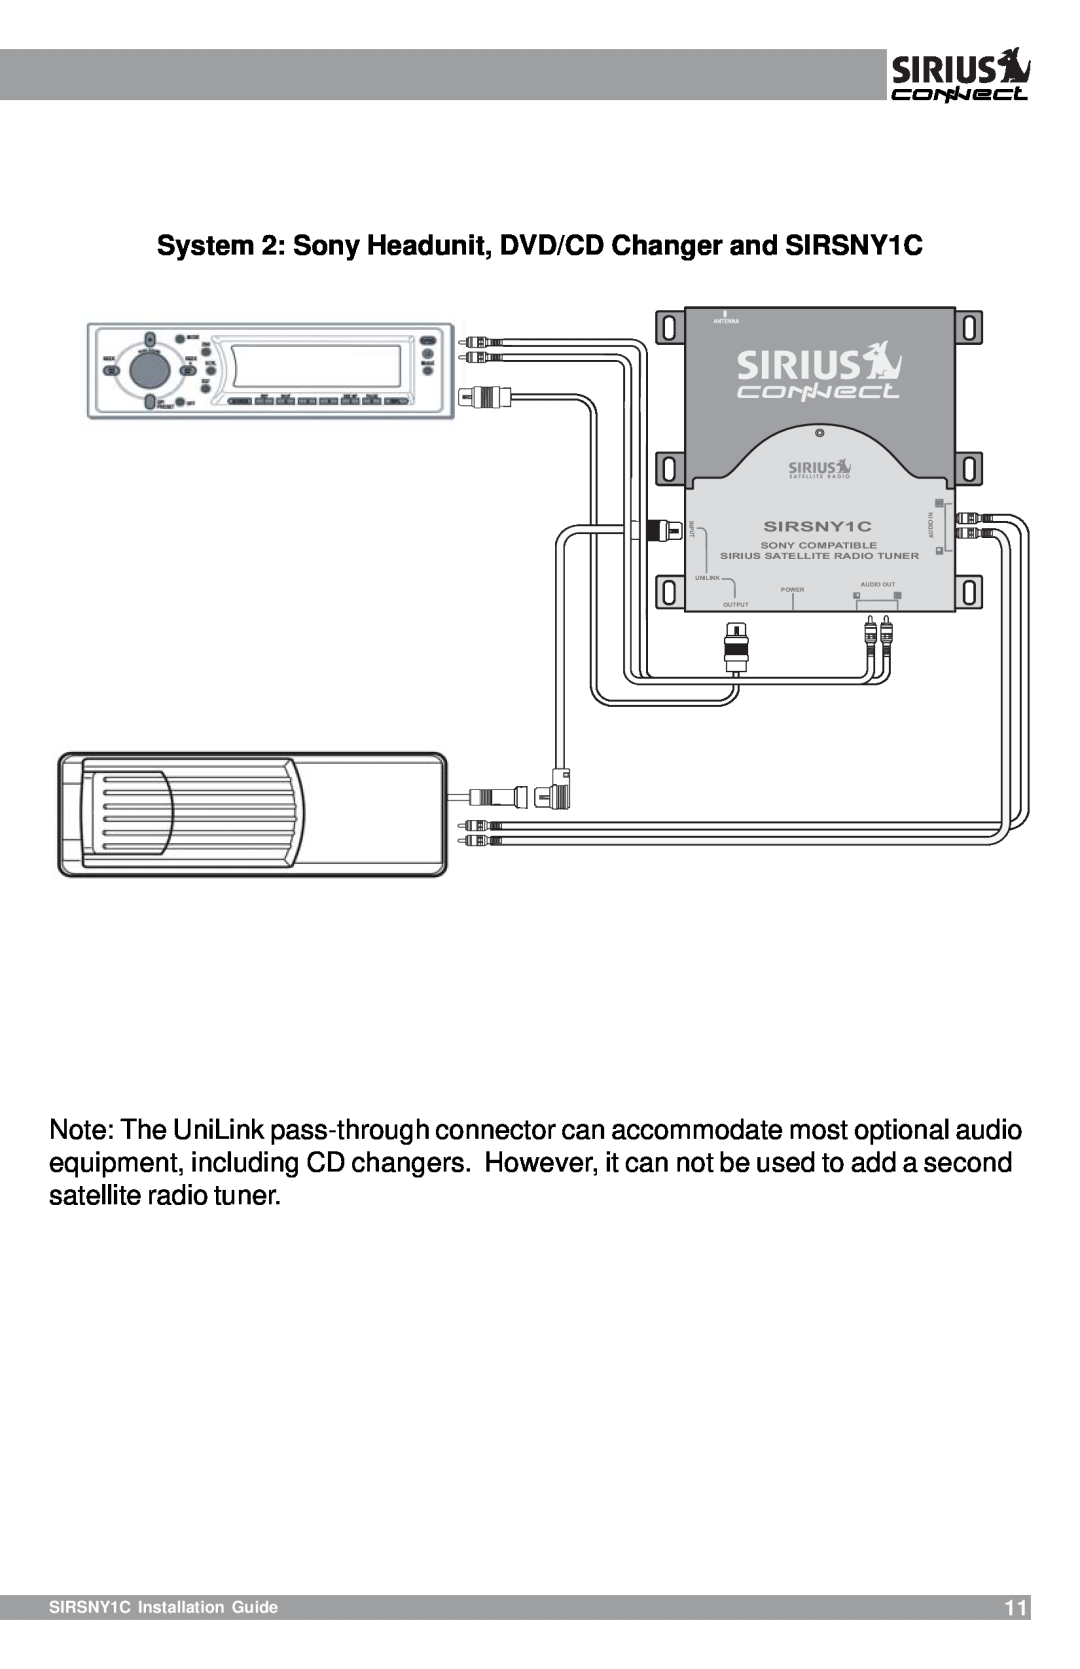 Sirius Satellite Radio manual System 2 Sony Headunit, DVD/CD Changer and SIRSNY1C, SIRSNY1C Installation Guide, Inaudio 